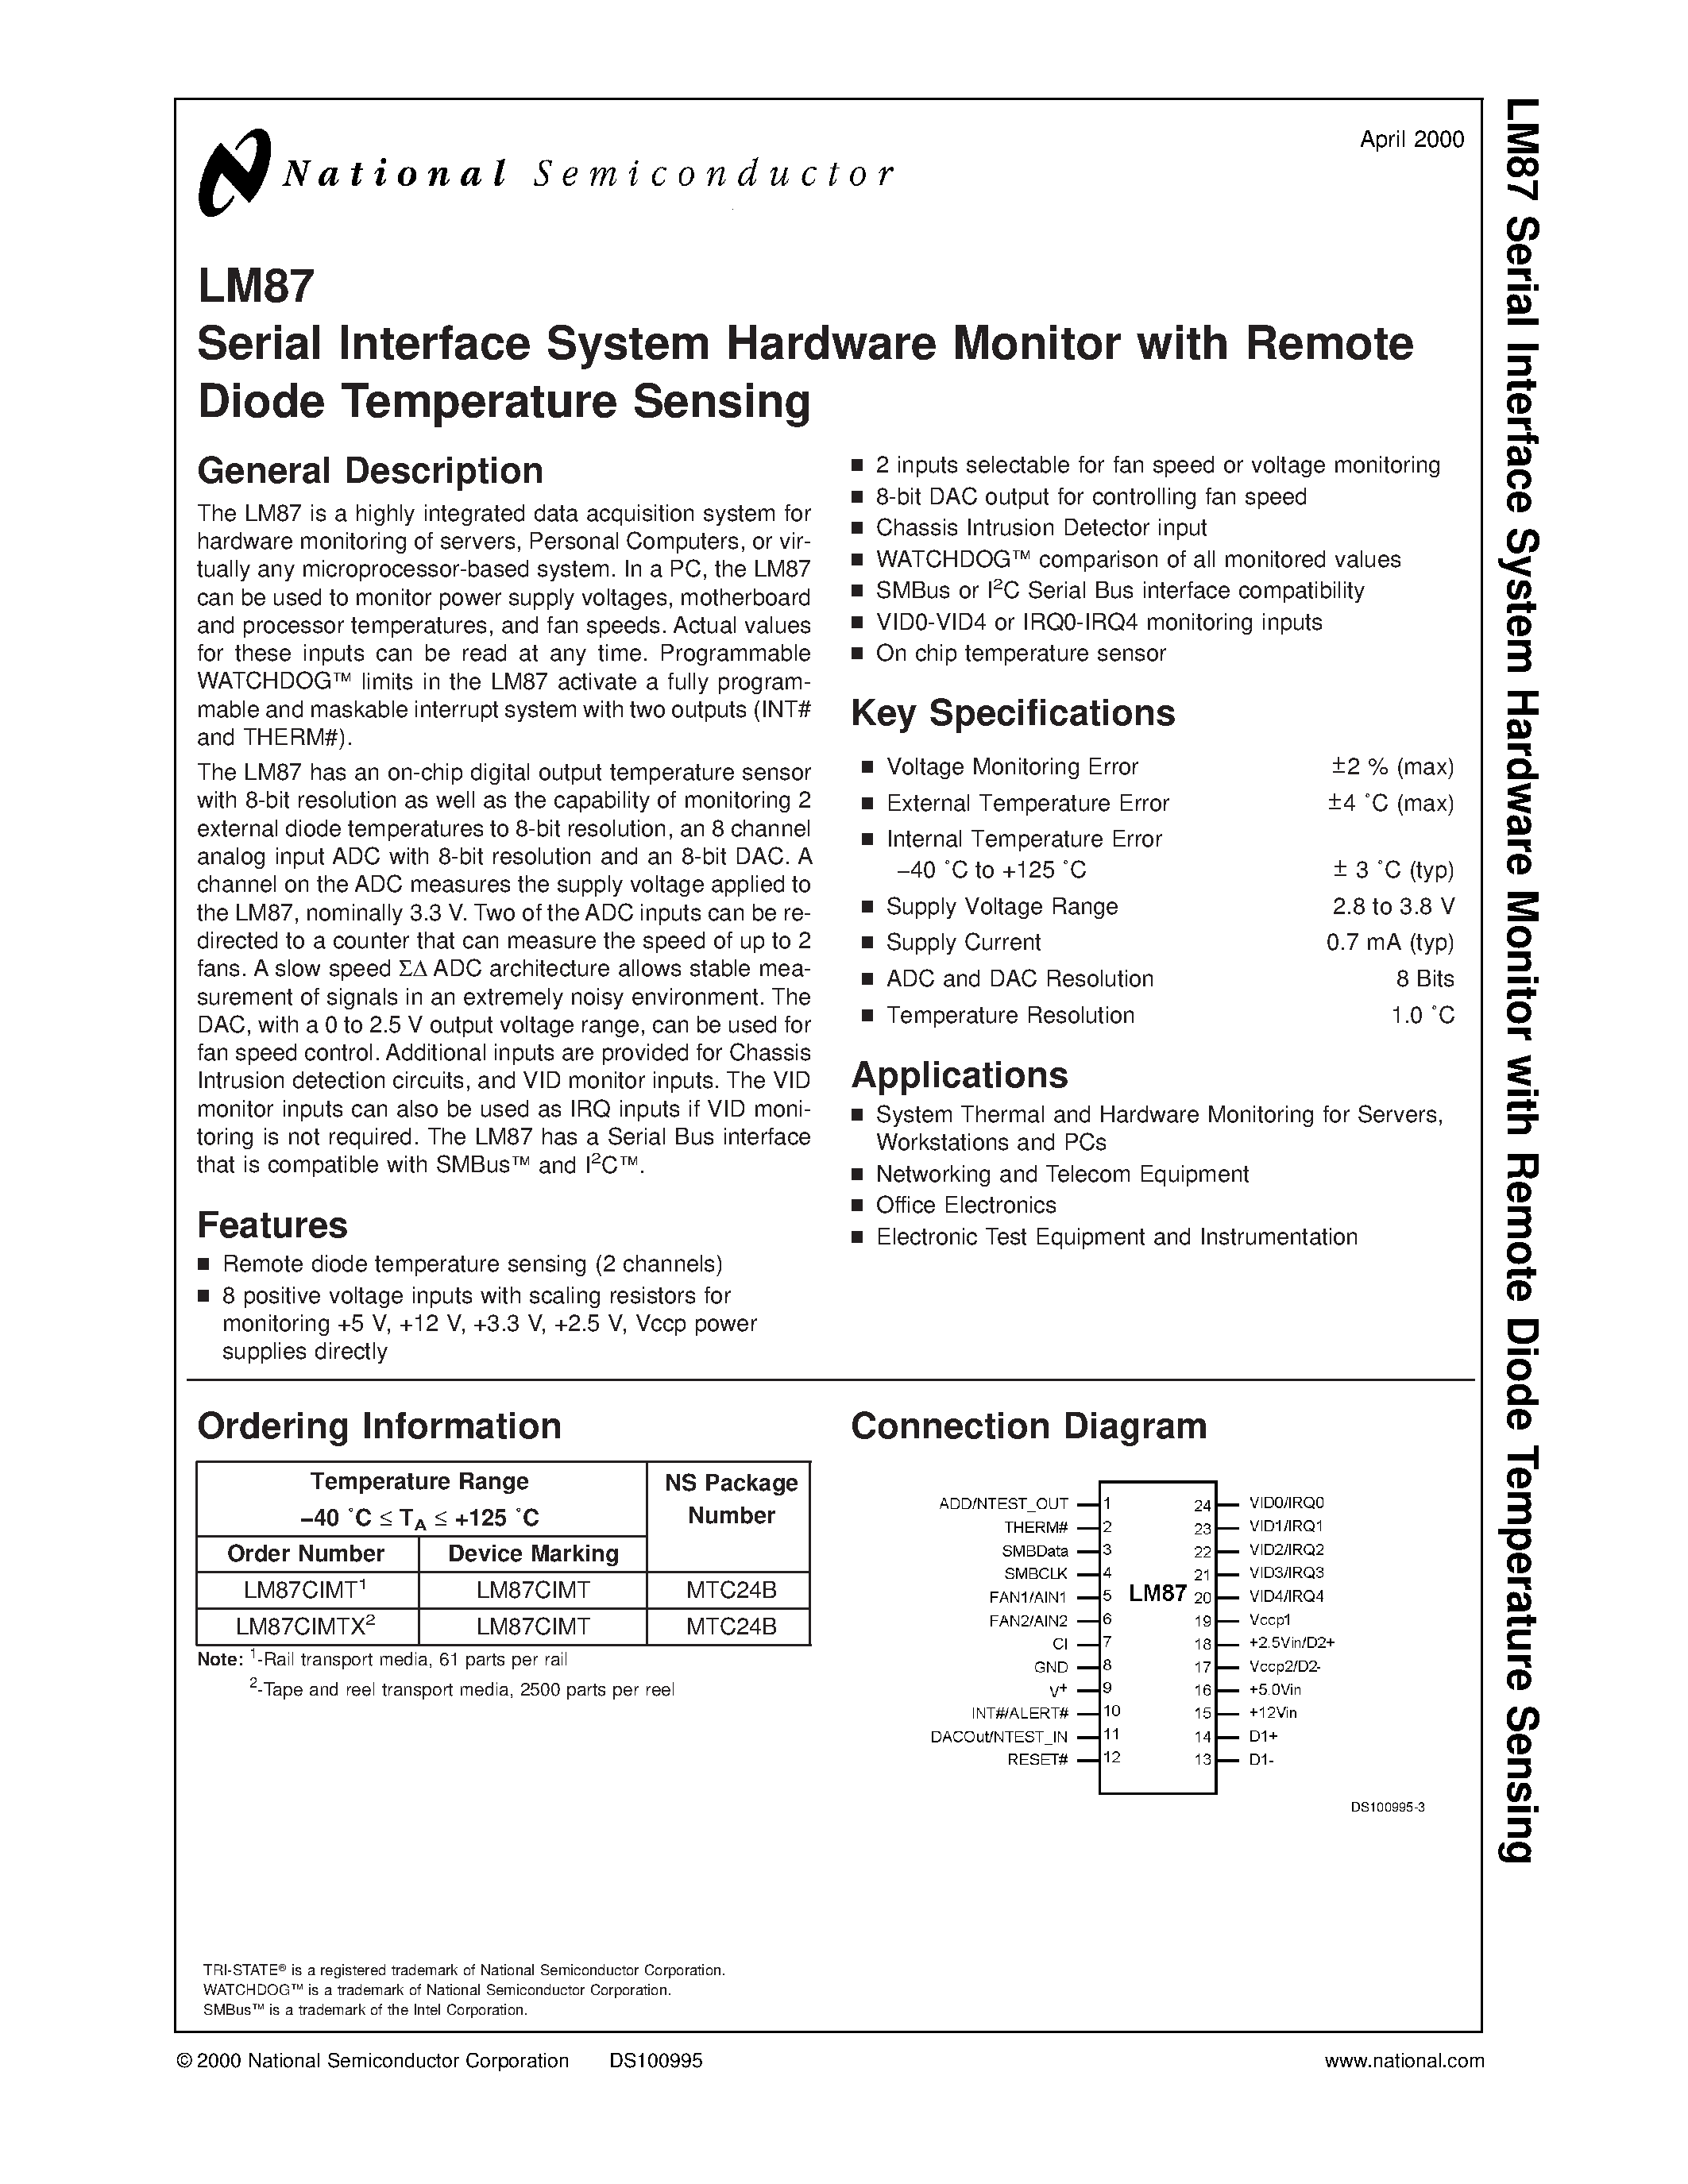 Даташит LM87CIMT1 - Serial Interface System Hardware Monitor with Remote Diode Temperature Sensing страница 1